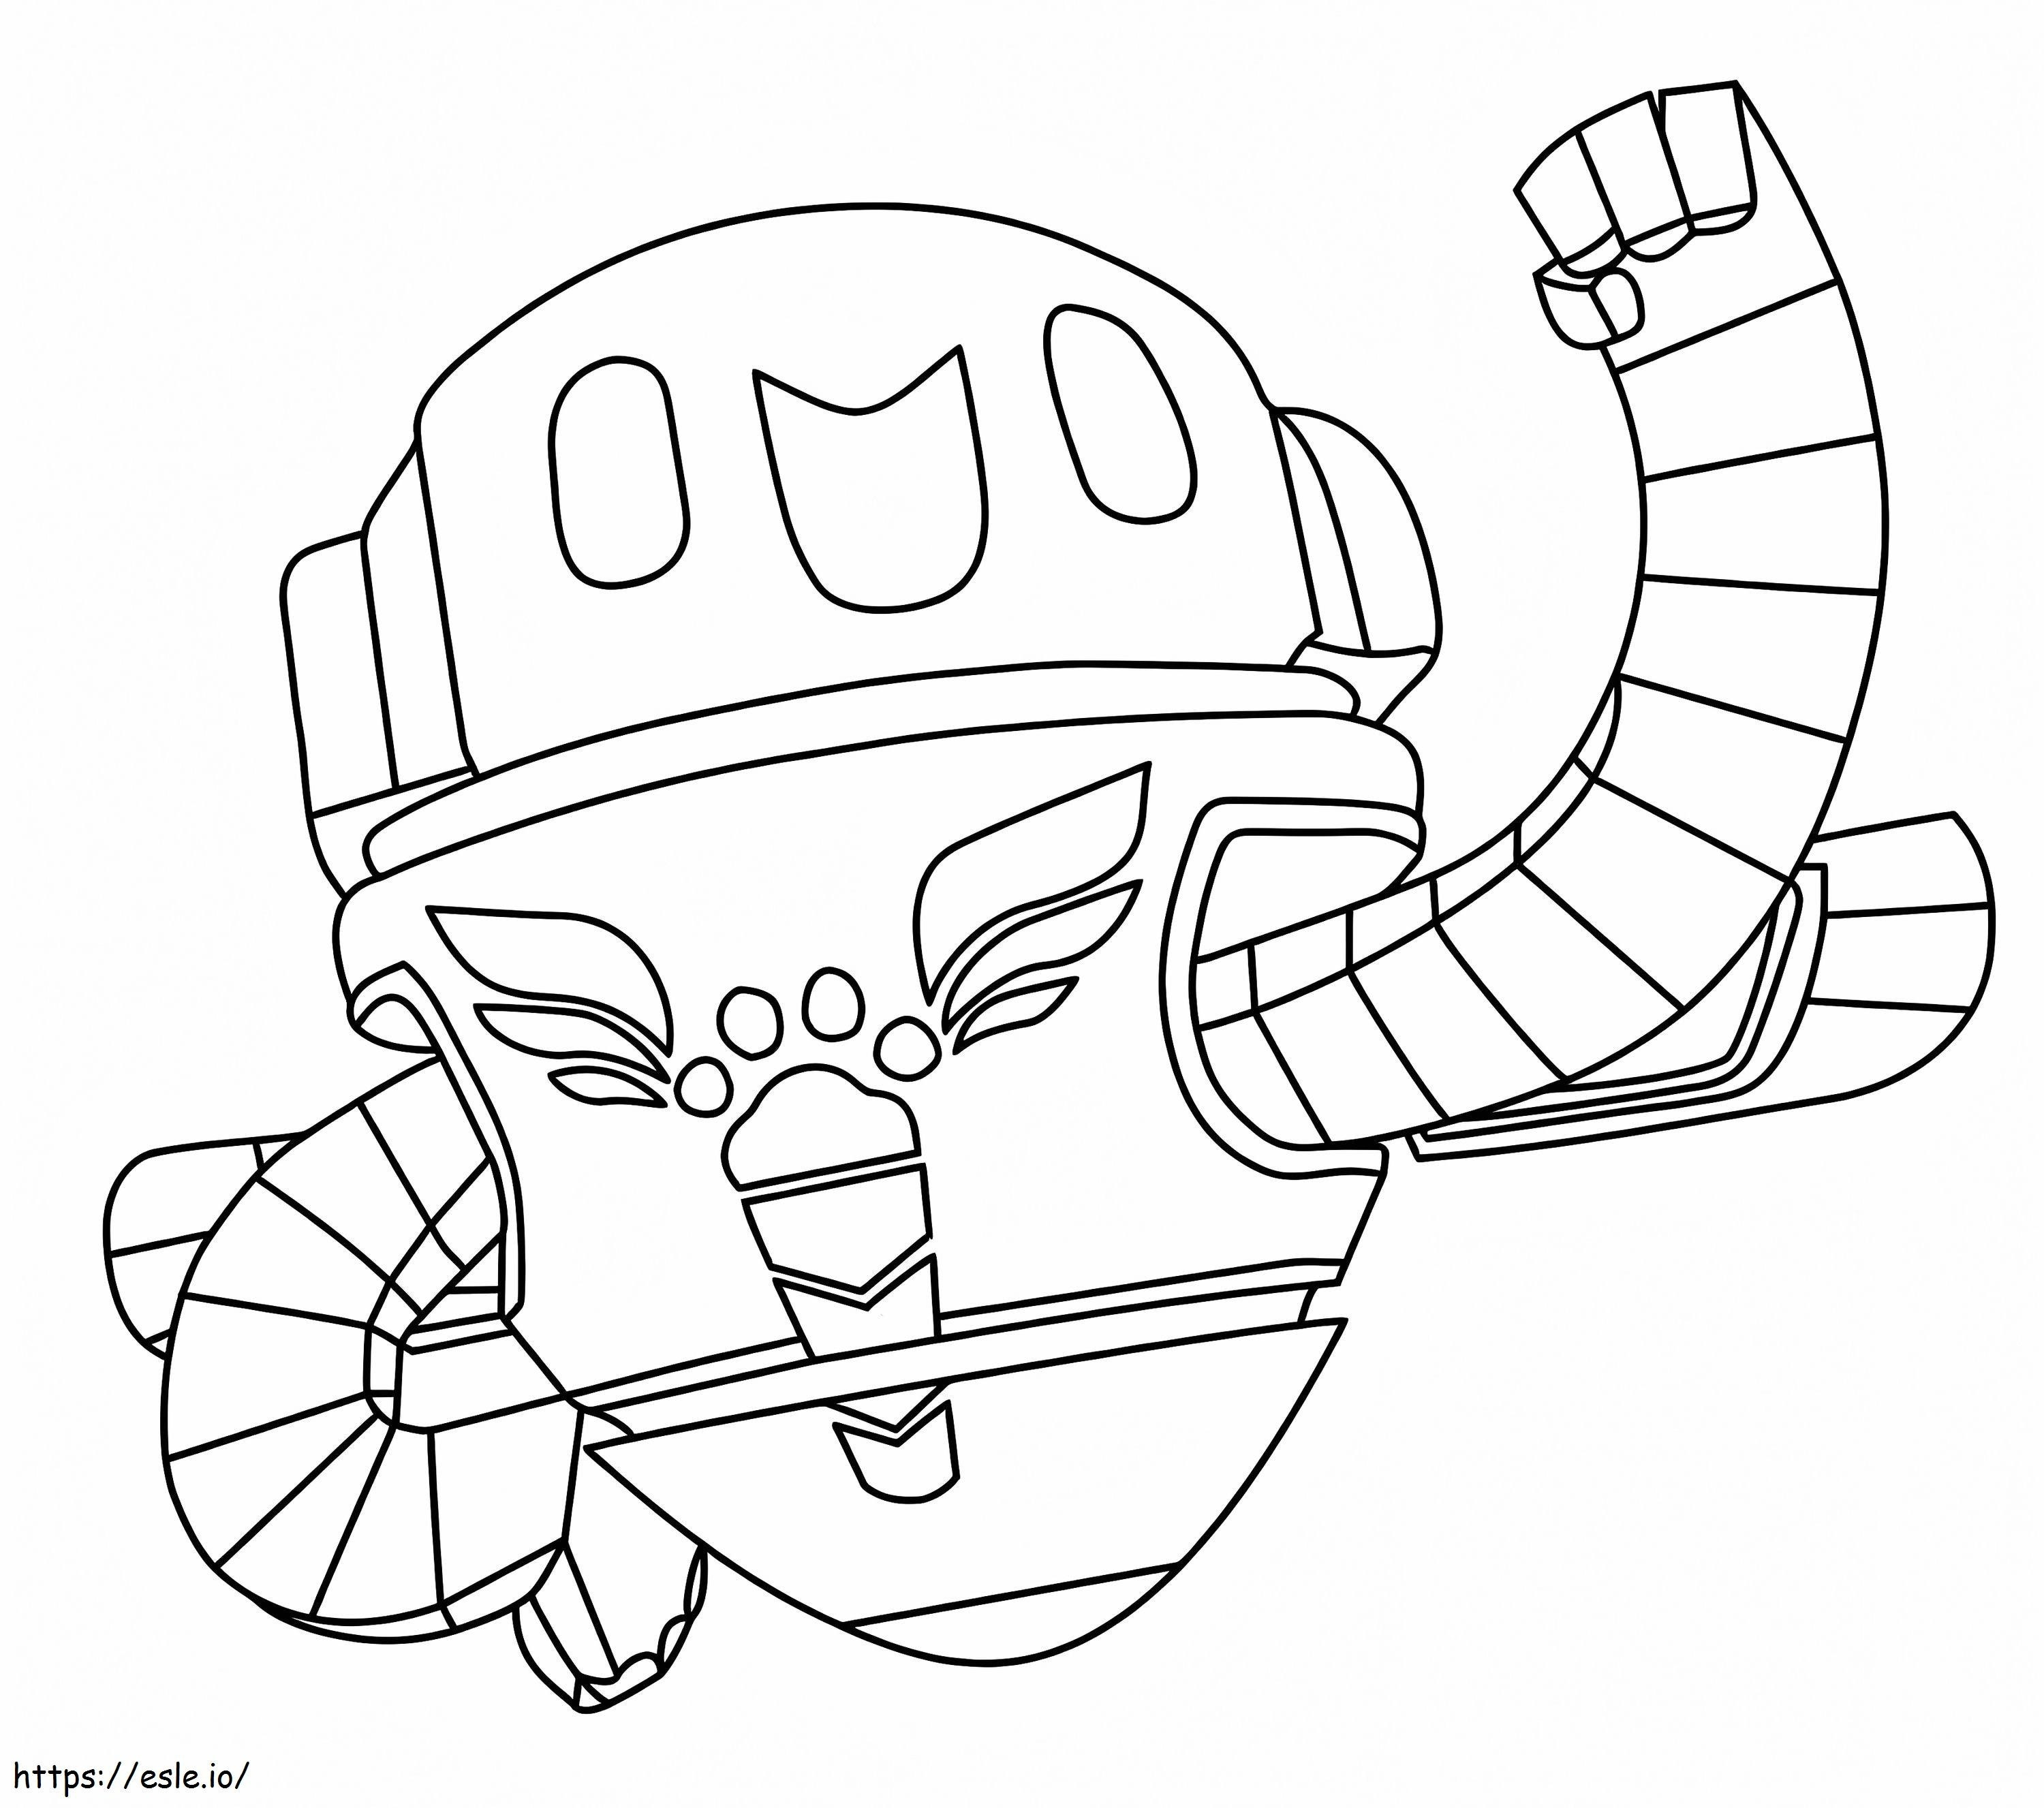 PJ Robot From PJ Masks coloring page